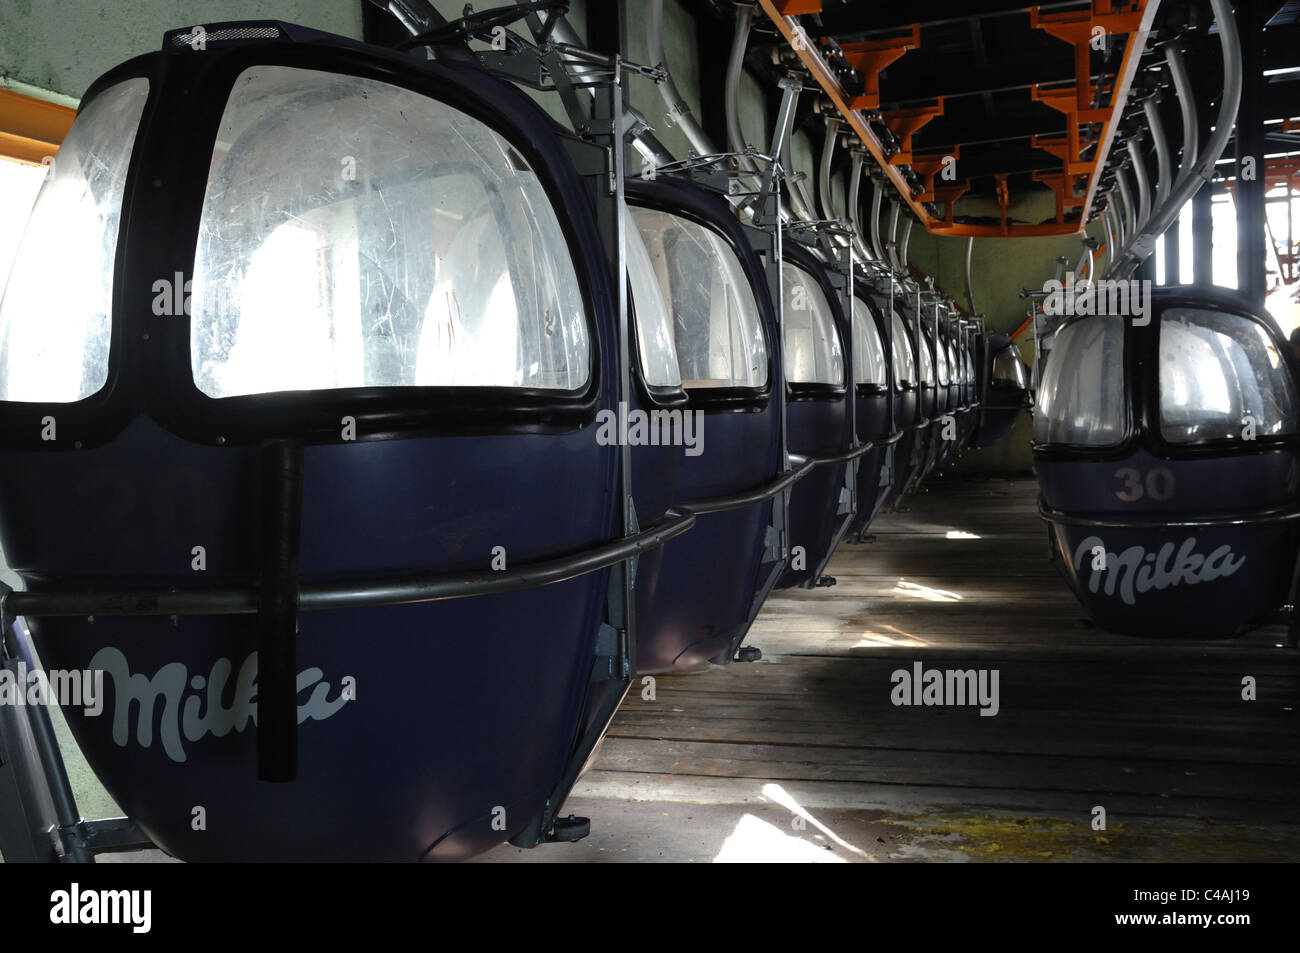 Ski lift cabins or gondolas racked up in the lift station in Dizin with an advertisers Milka logo on them Stock Photo